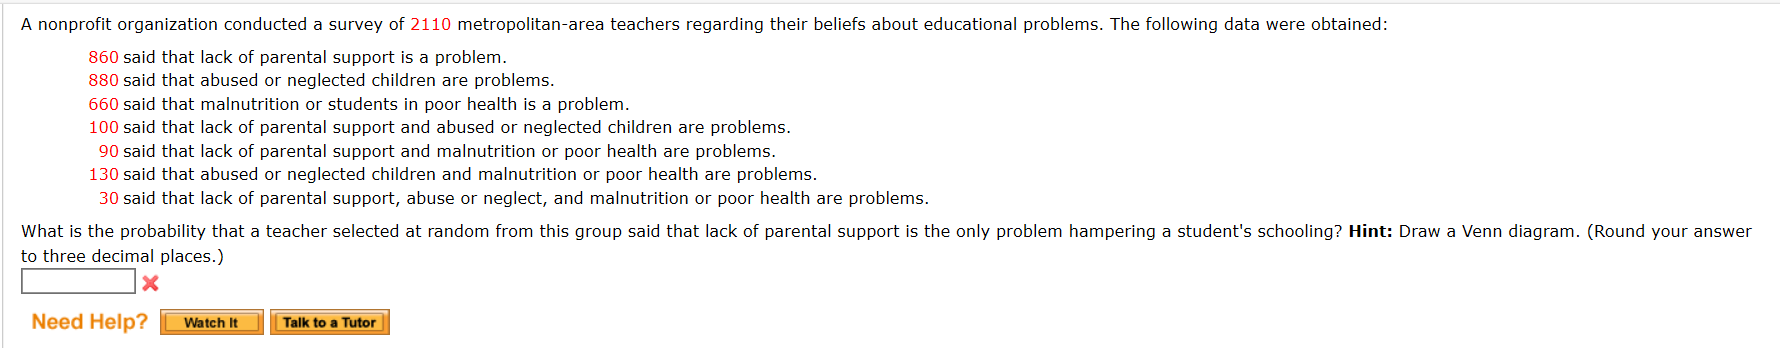 A nonprofit organization conducted a survey of 2110 metropolitan-area teachers regarding their beliefs about educational problems. The following data were obtained:
860 said that lack of parental support is a problem.
880 said that abused or neglected children are problems.
660 said that malnutrition or students in poor health is a problem.
100 said that lack of parental support and abused or neglected children are problems.
90 said that lack of parental support and malnutrition or poor health are problems.
130 said that abused or neglected children and malnutrition or poor health are problems.
30 said that lack of parental support, abuse or neglect, and malnutrition or poor health are problems.
What is the probability that a teacher selected at random from this group said that lack of parental support is the only problem hampering a student's schooling? Hint: Draw a Venn diagram. (Round your answer
to three decimal places.)
Need Help?
Watch It
Talk to a Tutor
